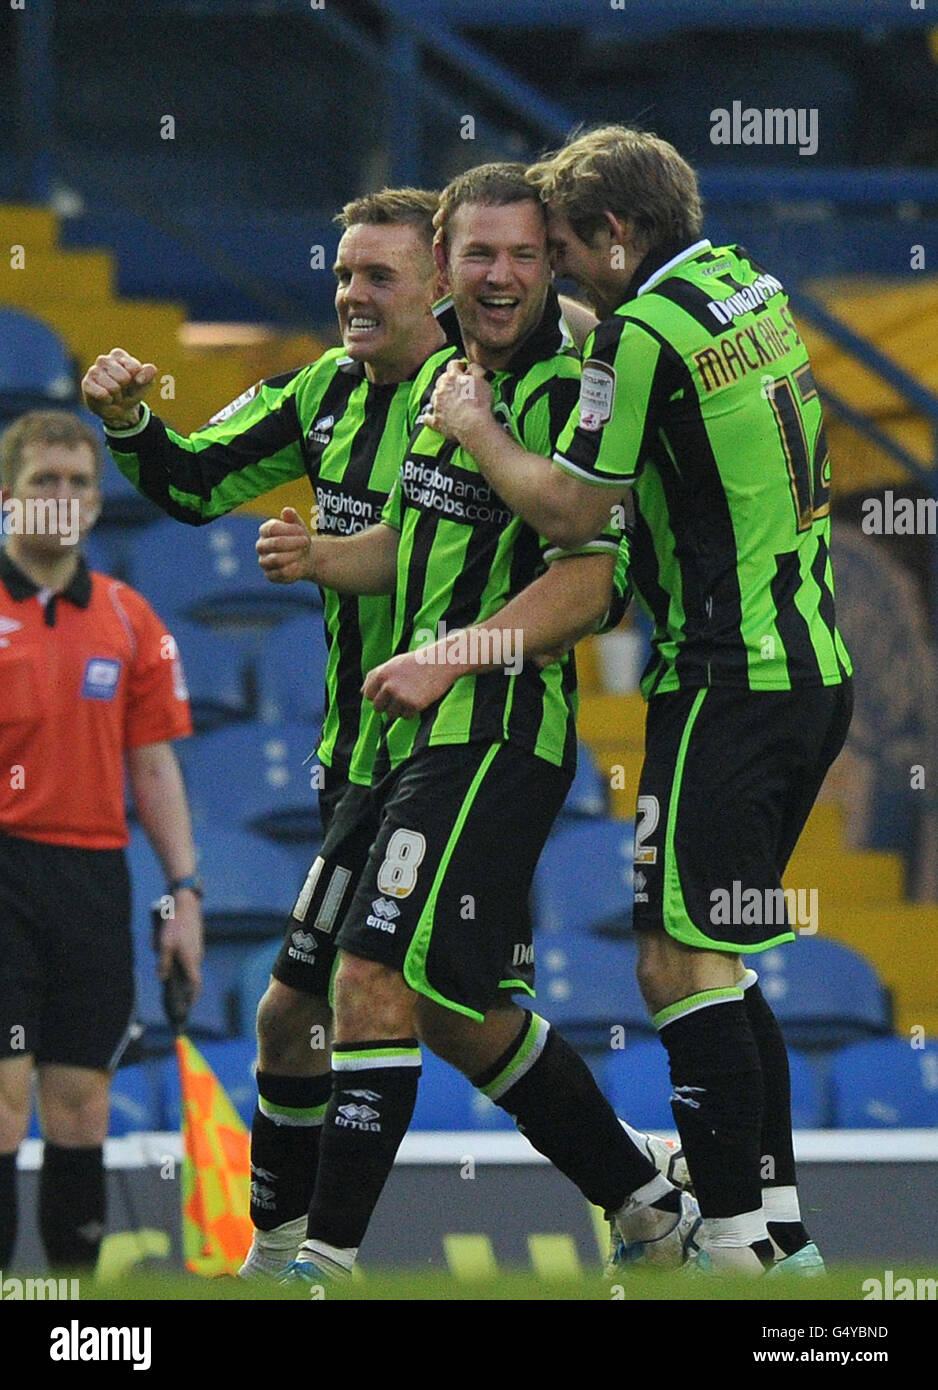 Brighton & Hove Albion's Alan Navarro is congratulated on scoring the winning goal during the npower Football League Championship match at Elland Road, Leeds. Stock Photo